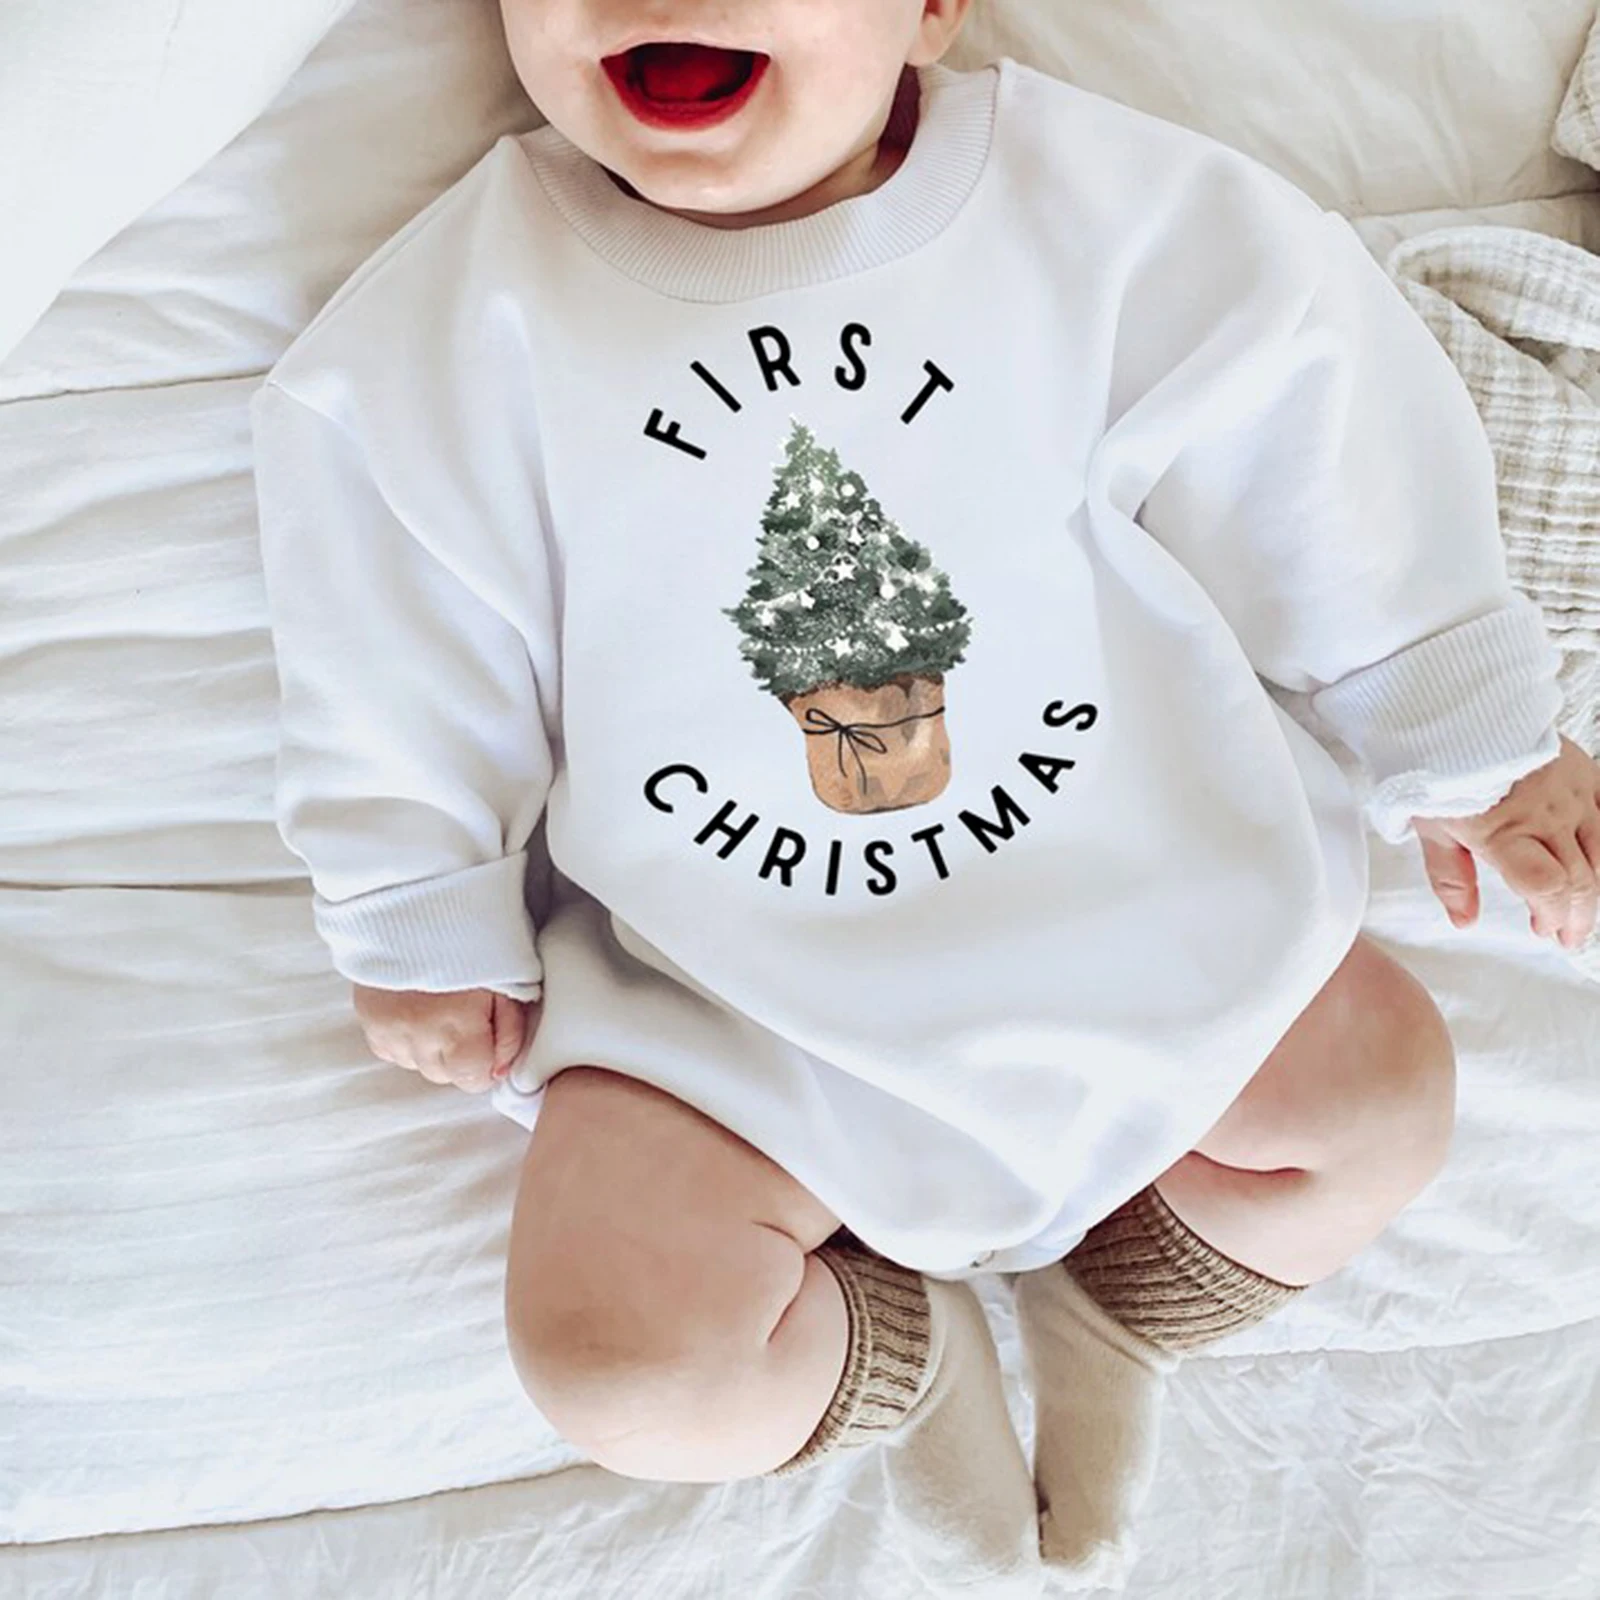 Baby Boy Girls Christmas Outfit Romper Jumpsuit Sweatshirts Playsuit Xmas Pullover Bodysuits Fall Winter Child Clothes